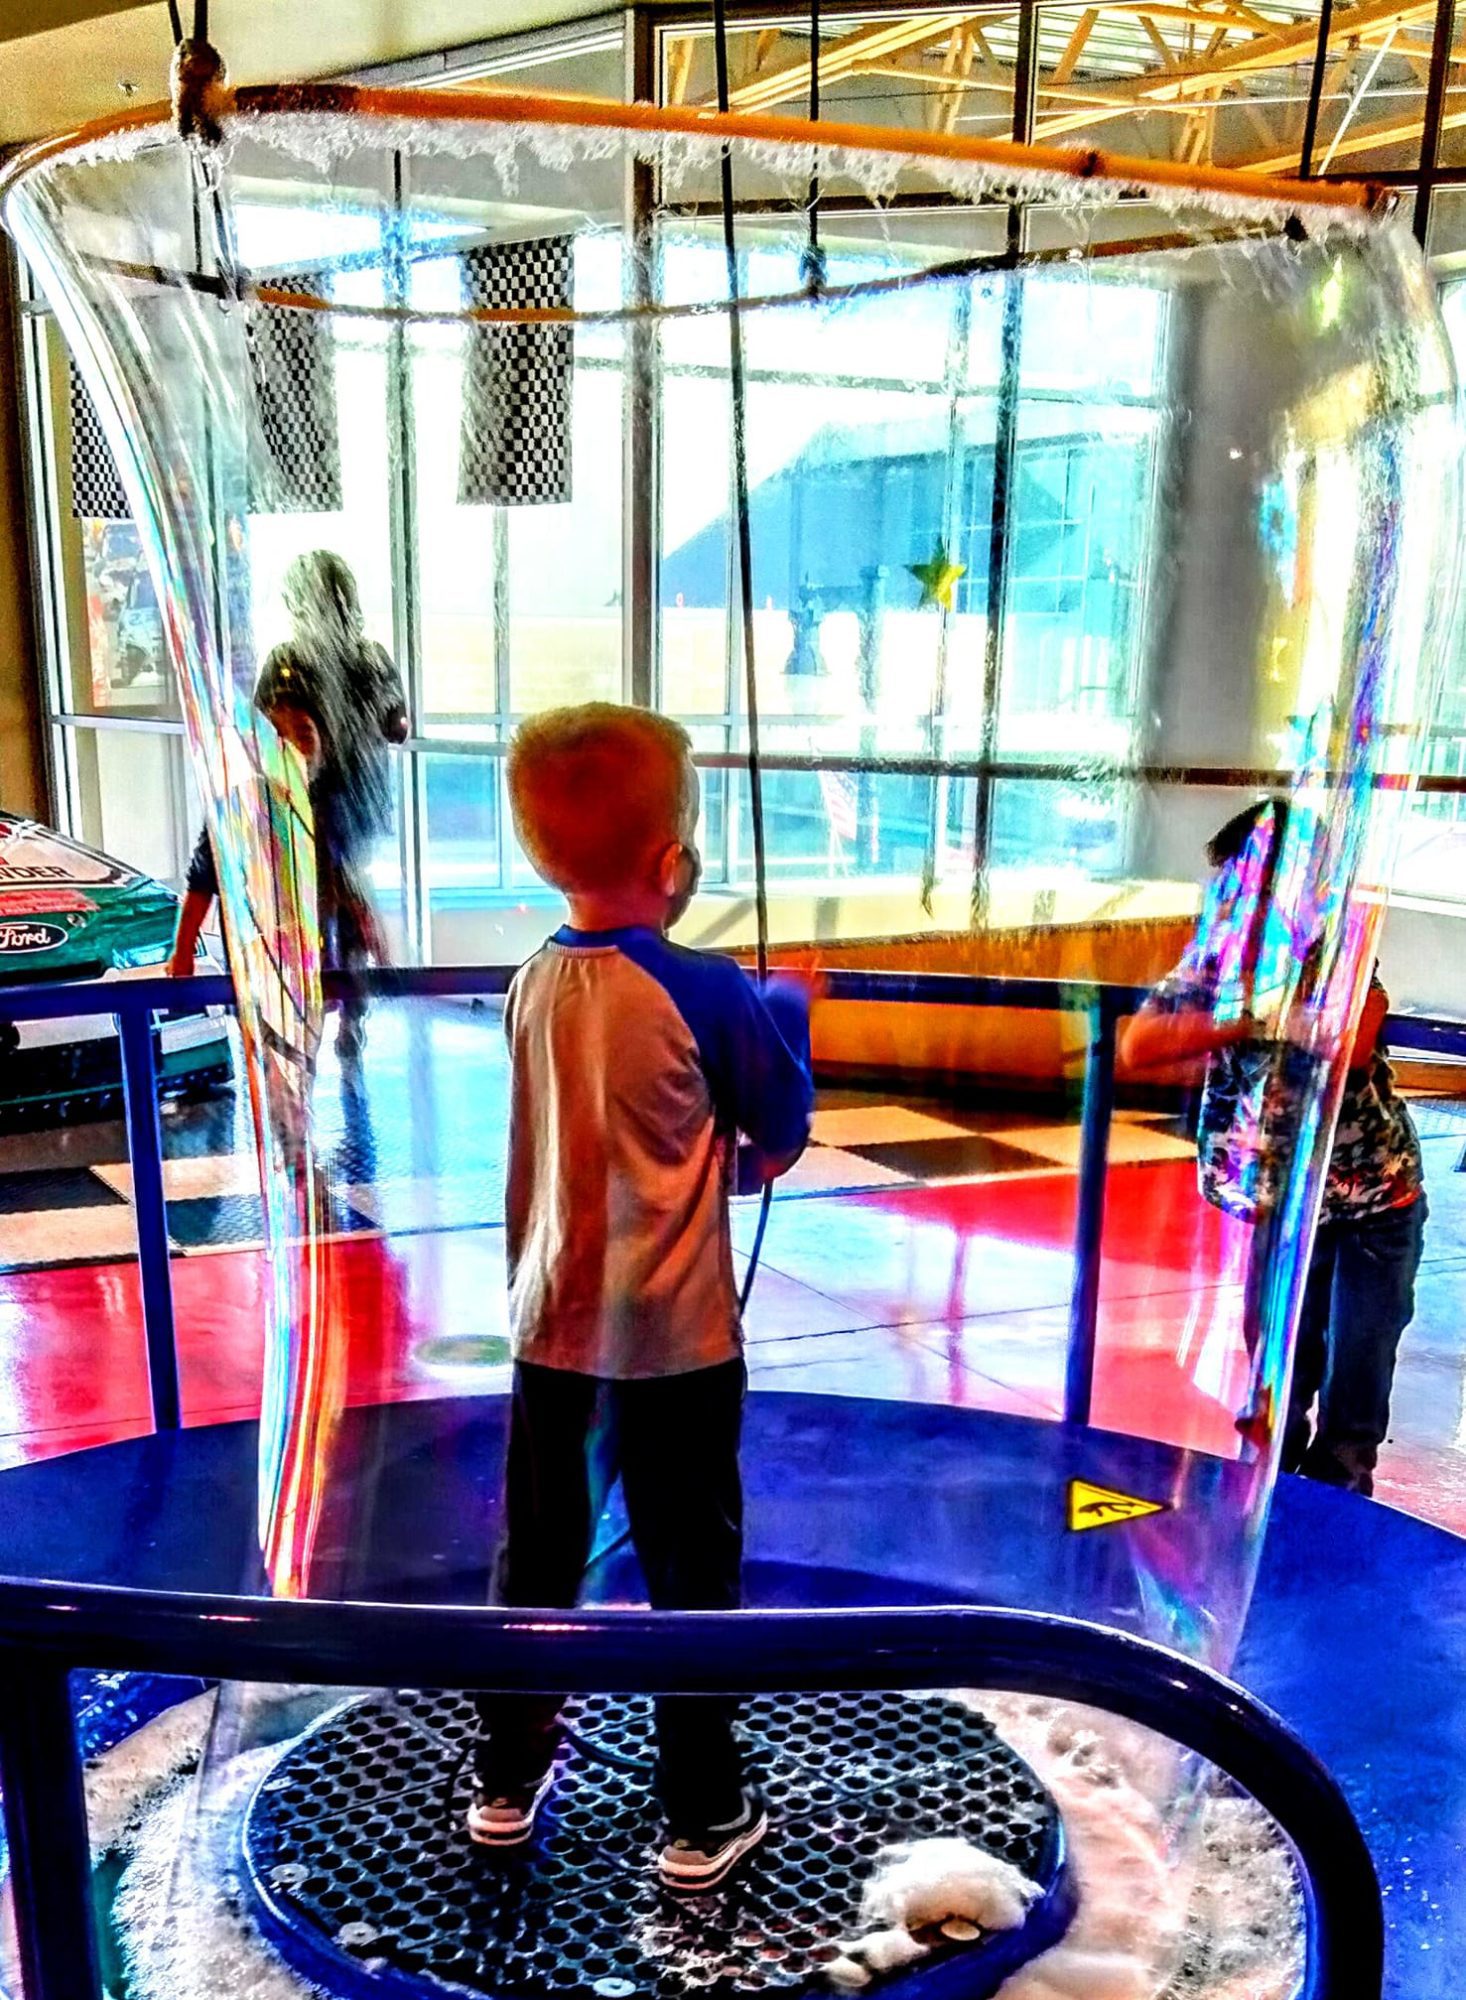 The Bubble Ring, a larger-than-life bubble maker, at the Terre Haute Children's Museum